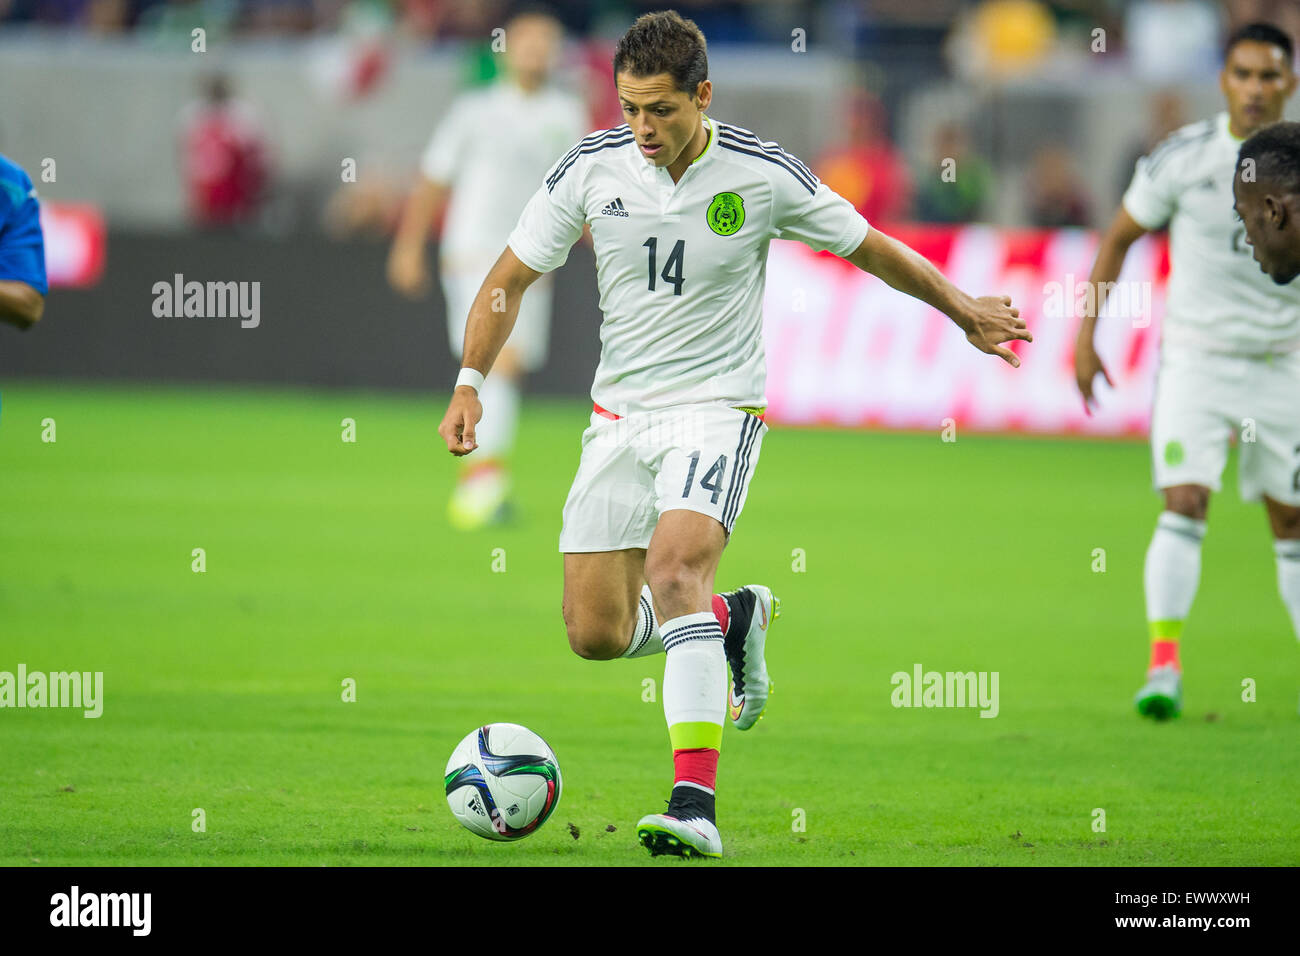 Houston, TX, USA. 1st July, 2015. Mexico forward Javier Hernandez (14) controls the ball during the 1st half of an international soccer match between Honduras and Mexico at NRG Stadium in Houston, TX. Trask Smith/CSM/Alamy Live News Stock Photo